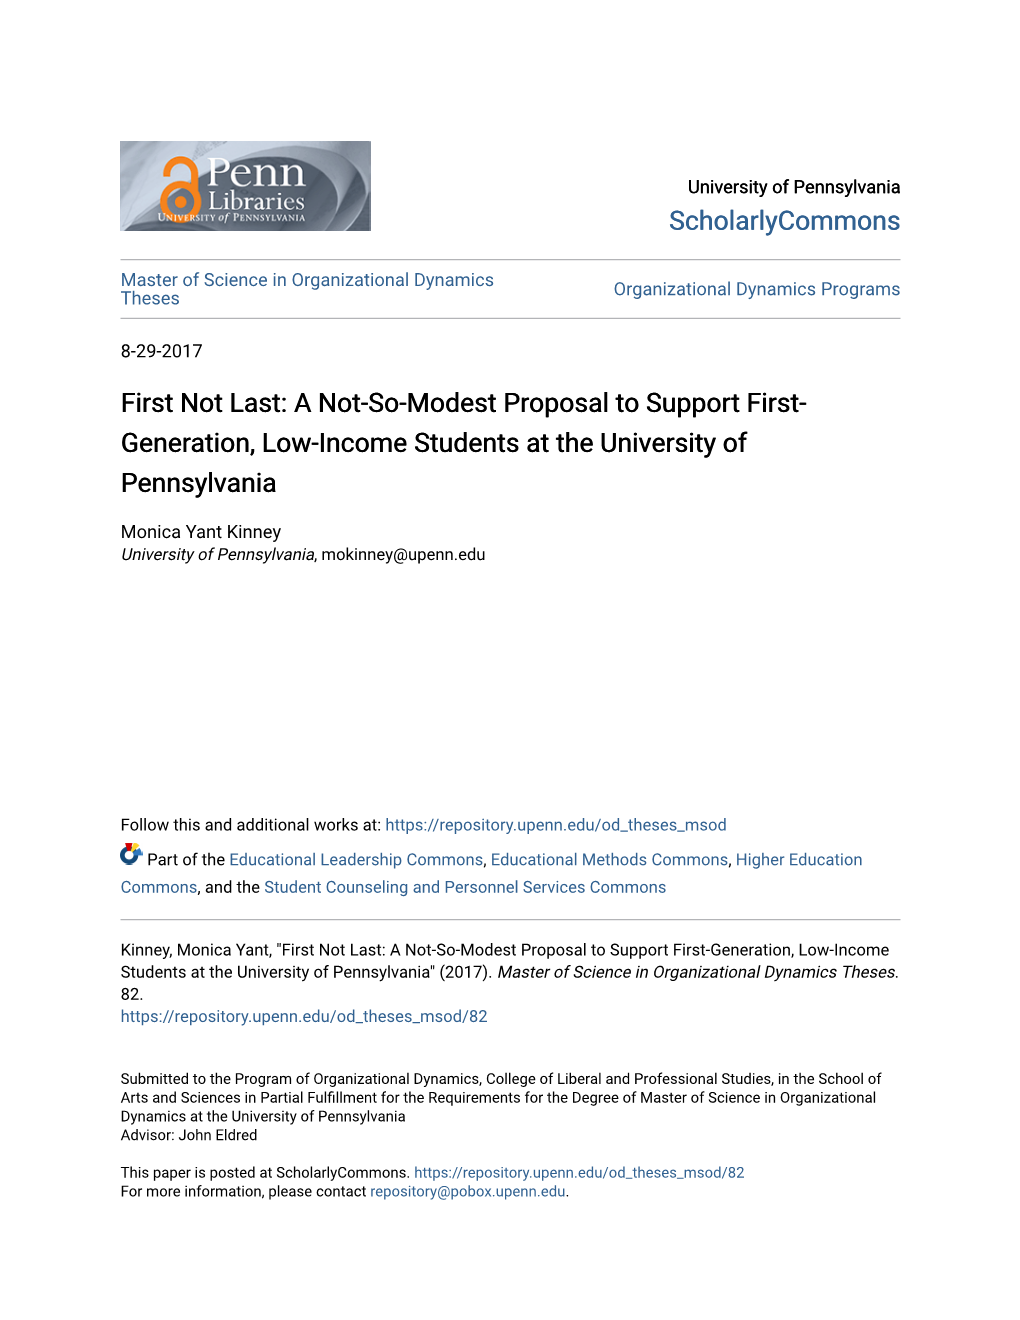 First Not Last: a Not-So-Modest Proposal to Support First-Generation, Low-Income Students at the University of Pennsylvania" (2017)